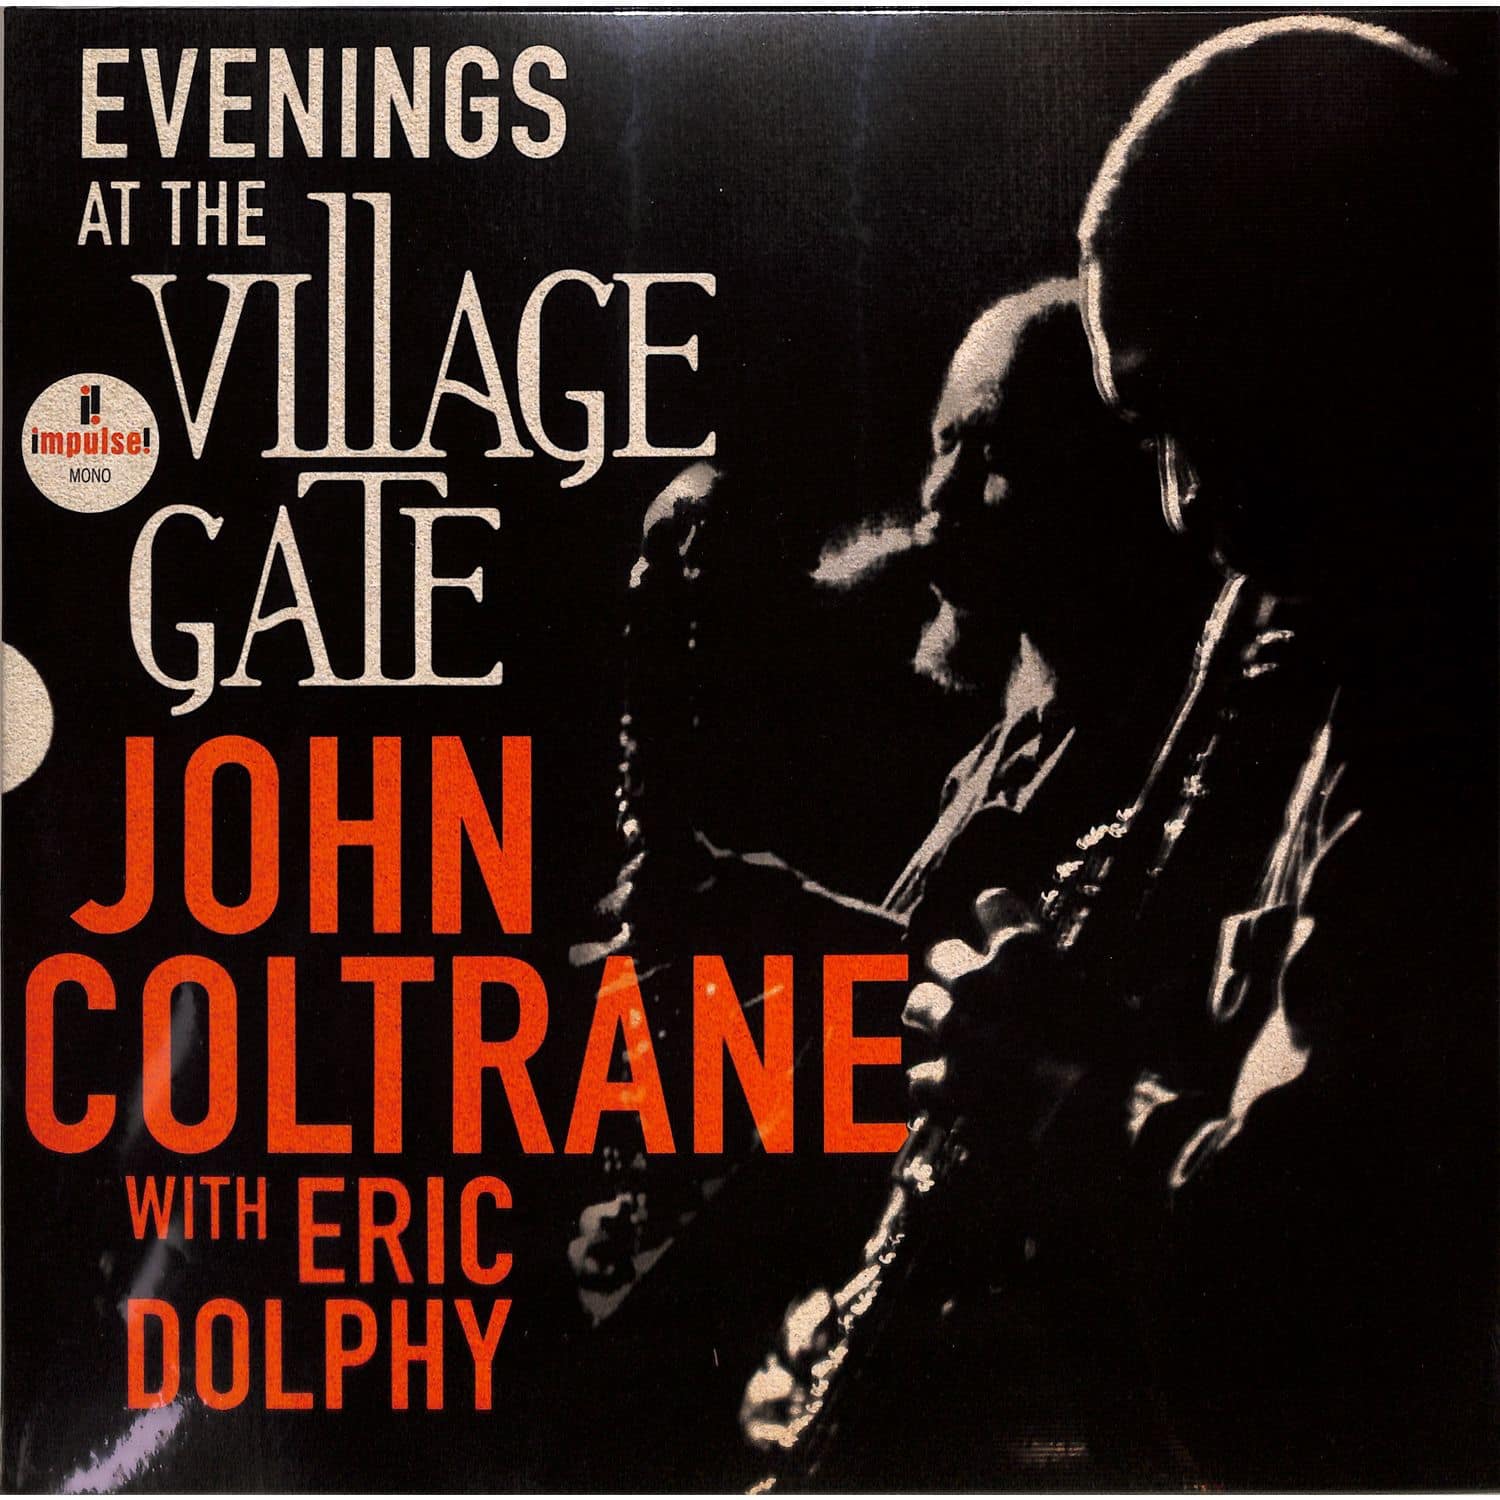 John Coltrane / Eric Dolphy - EVENINGS AT THE VILLAGE GATE 